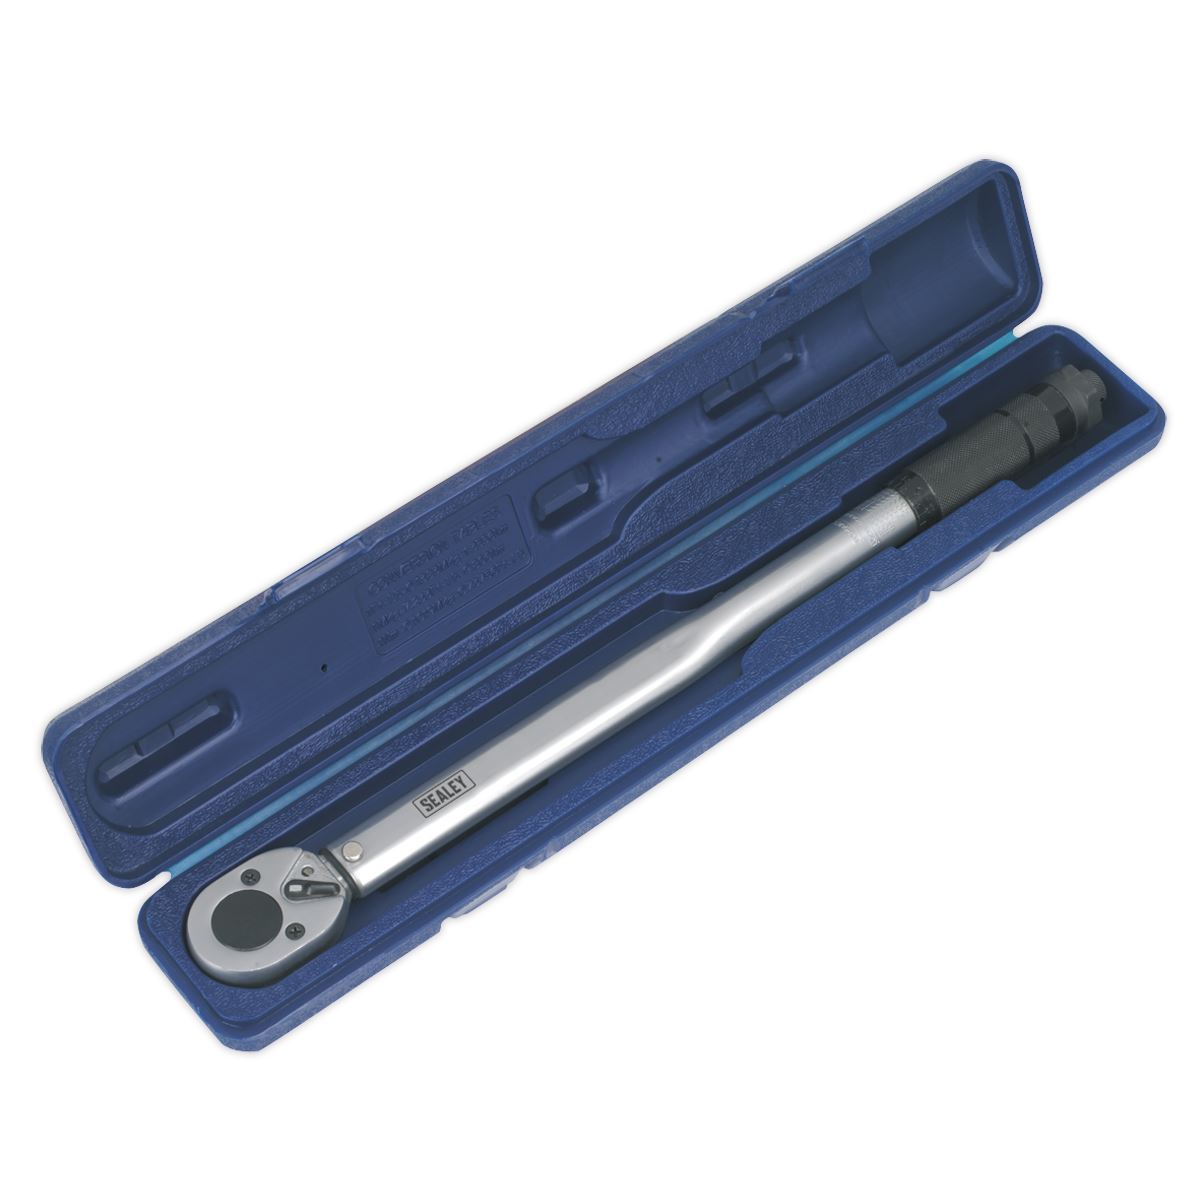 Sealey Micrometer Torque Wrench 1/2"Sq Drive Calibrated AK624